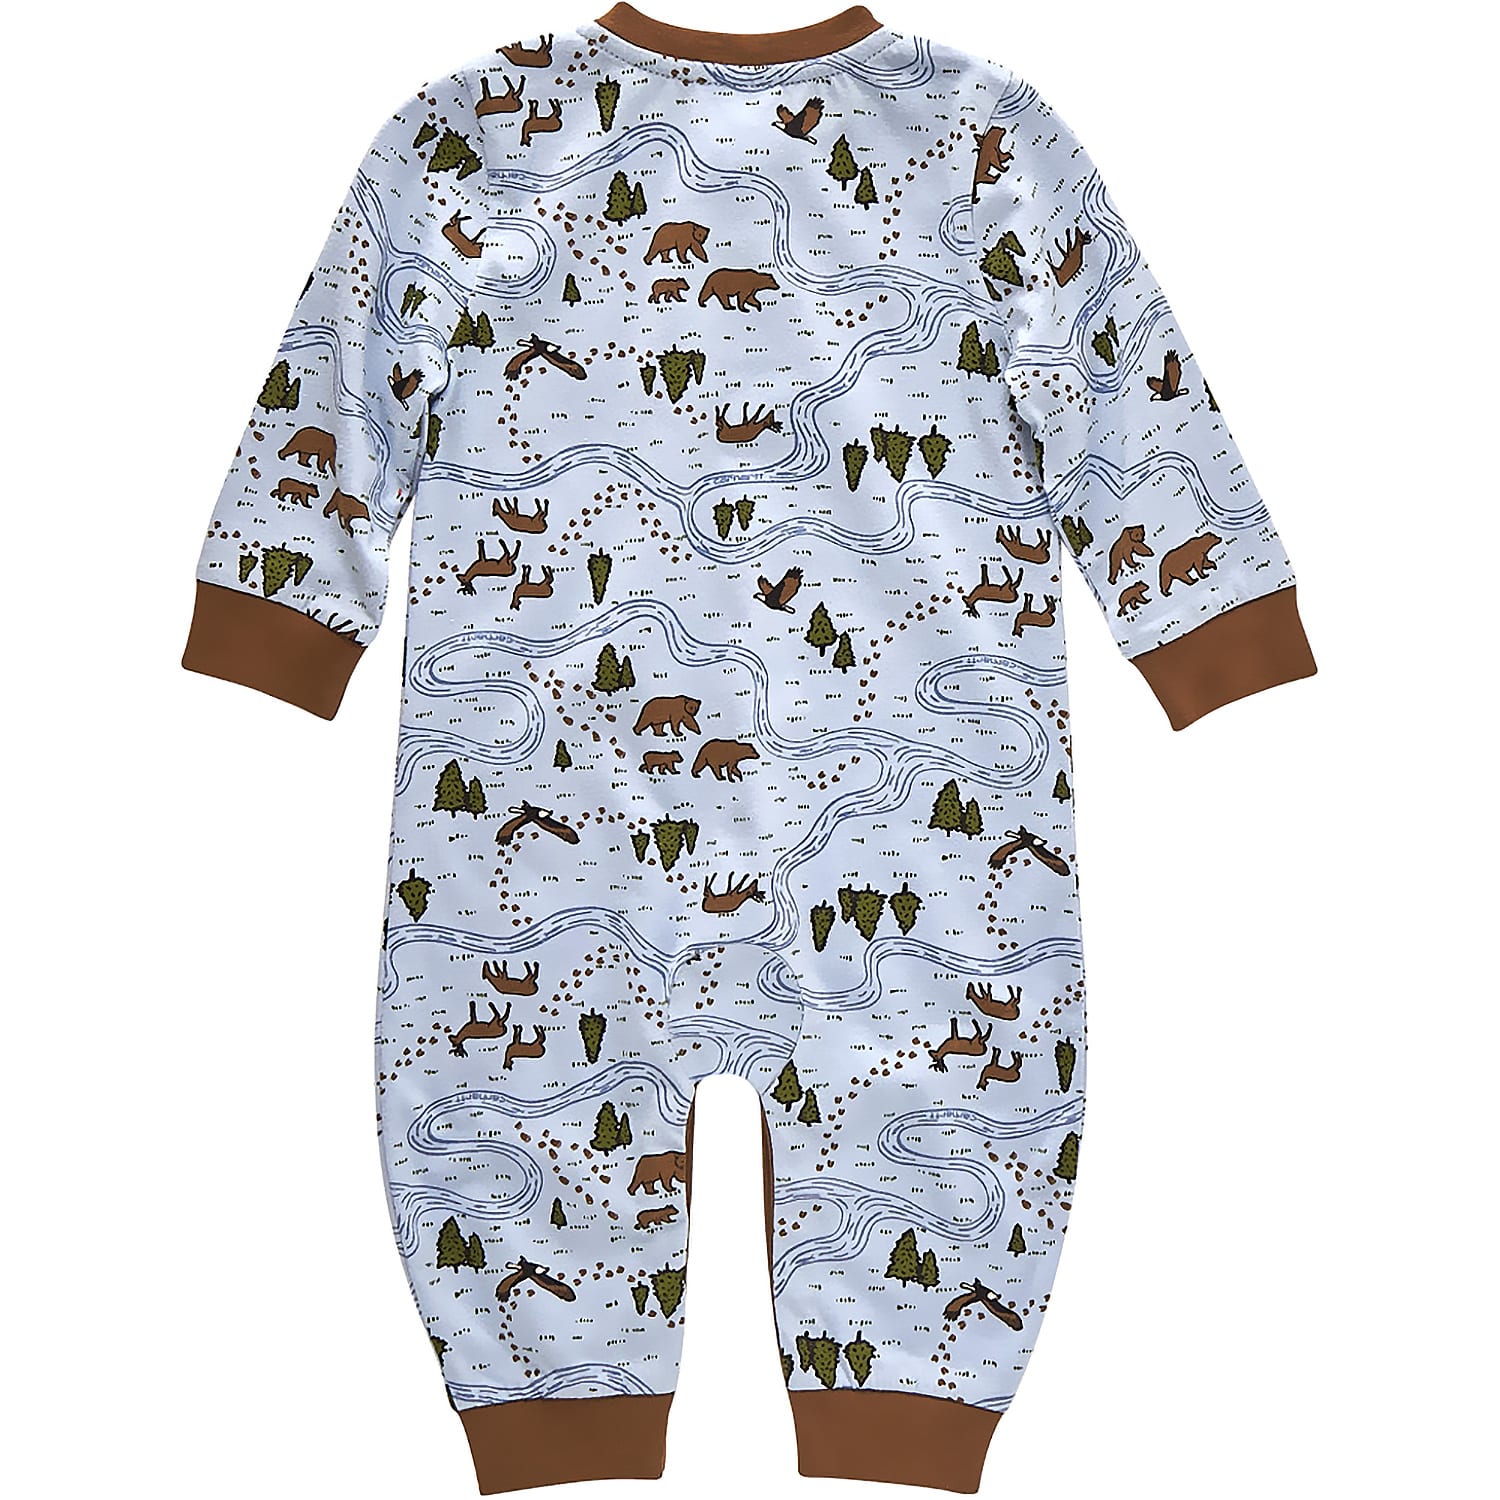 Carhartt® Infants’ Printed Long-Sleeve Coveralls